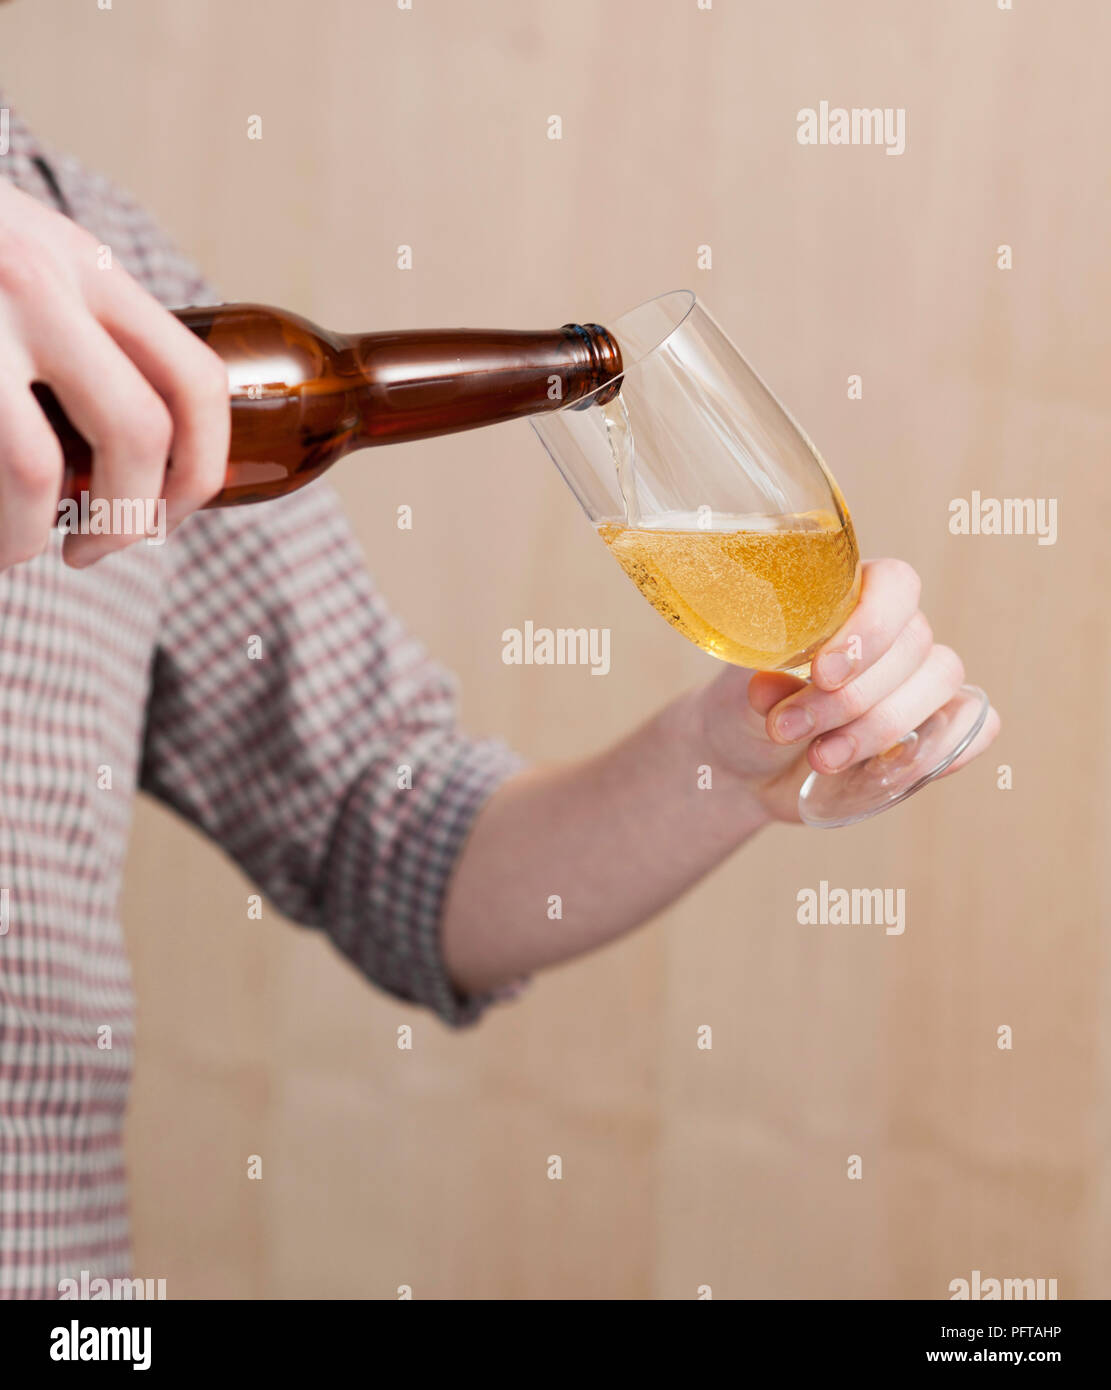 Pouring beer into glass, holding glass at angle Stock Photo